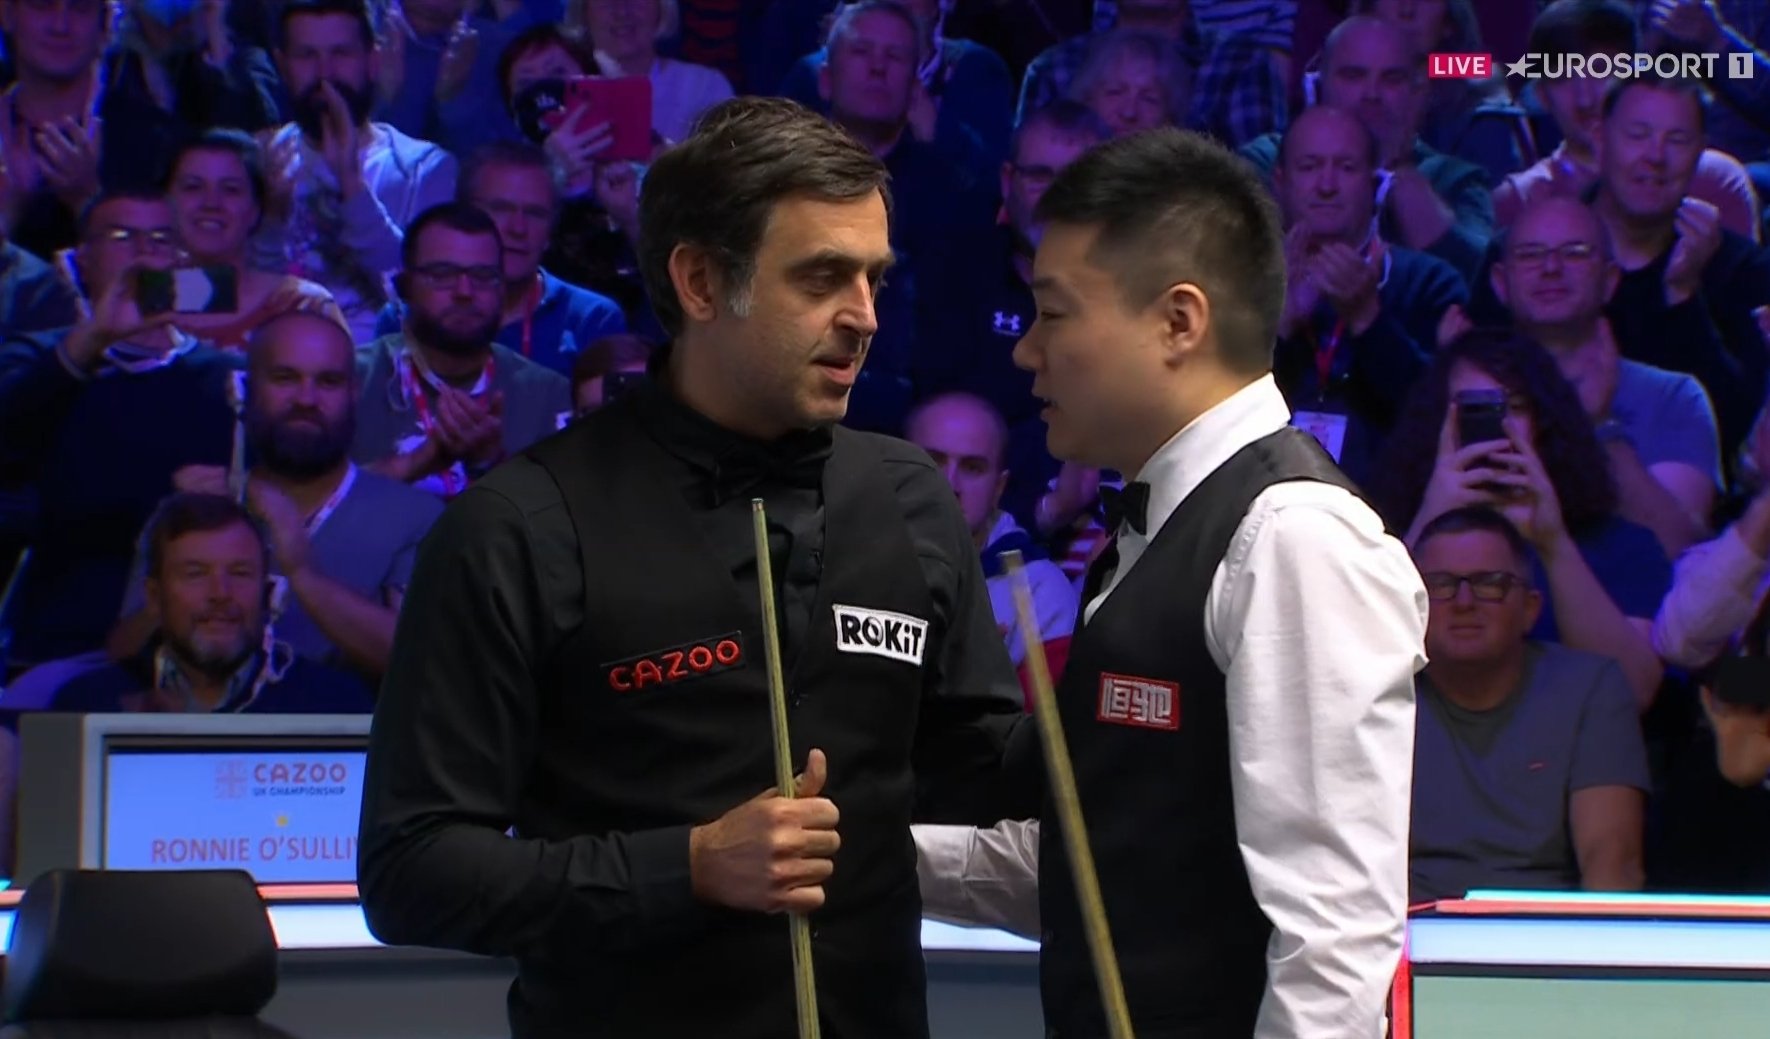 Snooker results Ronnie OSullivan loses 6-0 to Ding Junhui in UK Championship quarter-finals